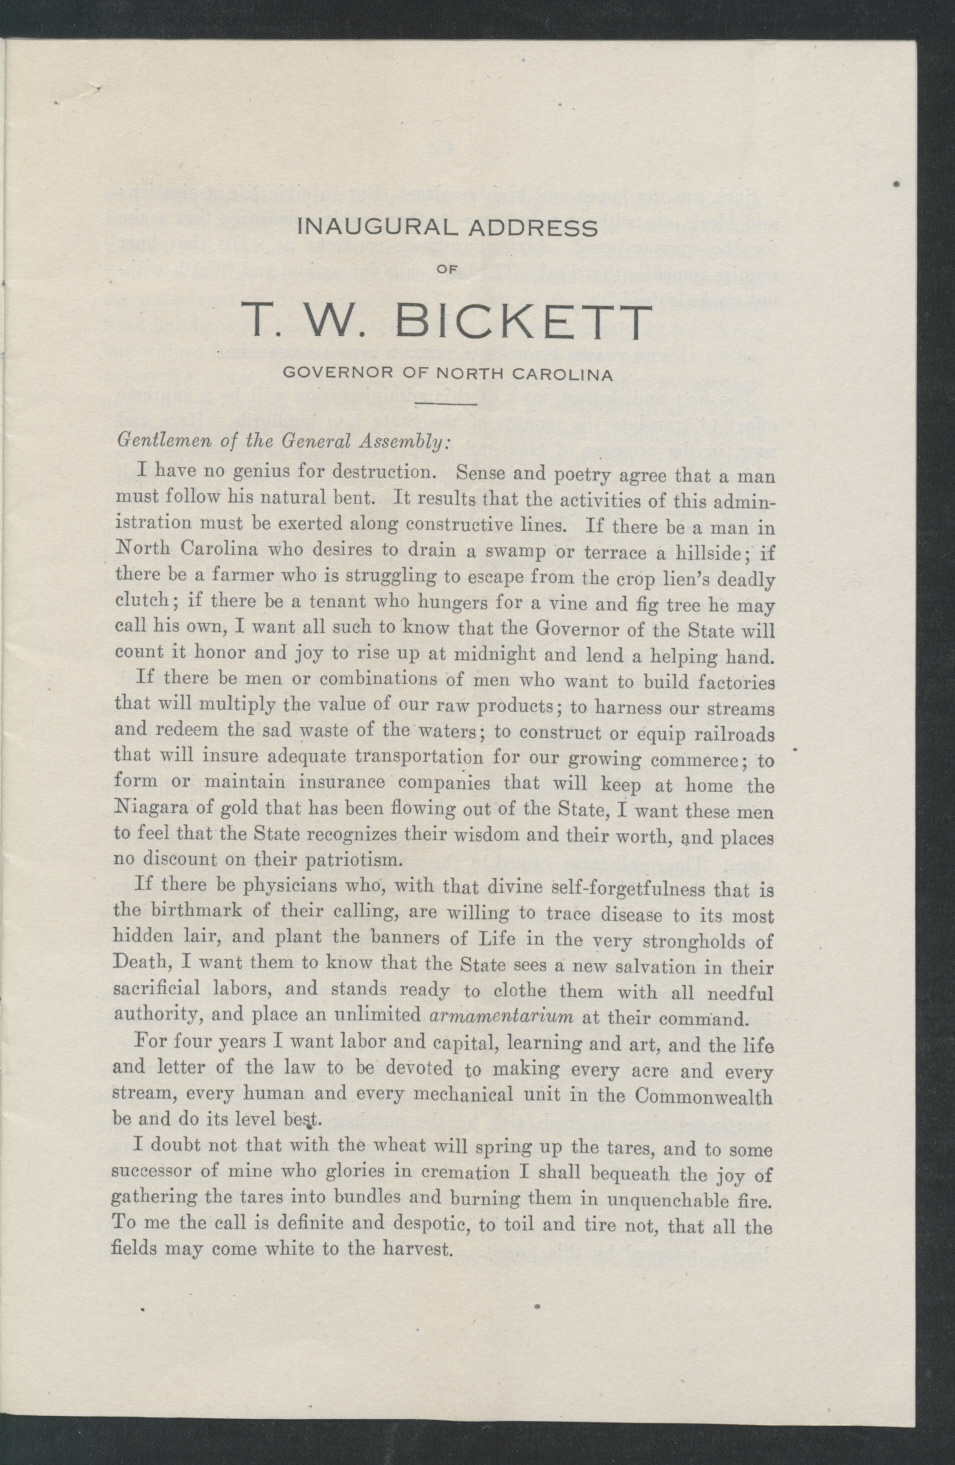 Inaugural Address of Governor Thomas W. Bickett to the General Assembly, January 11, 1917, page 1